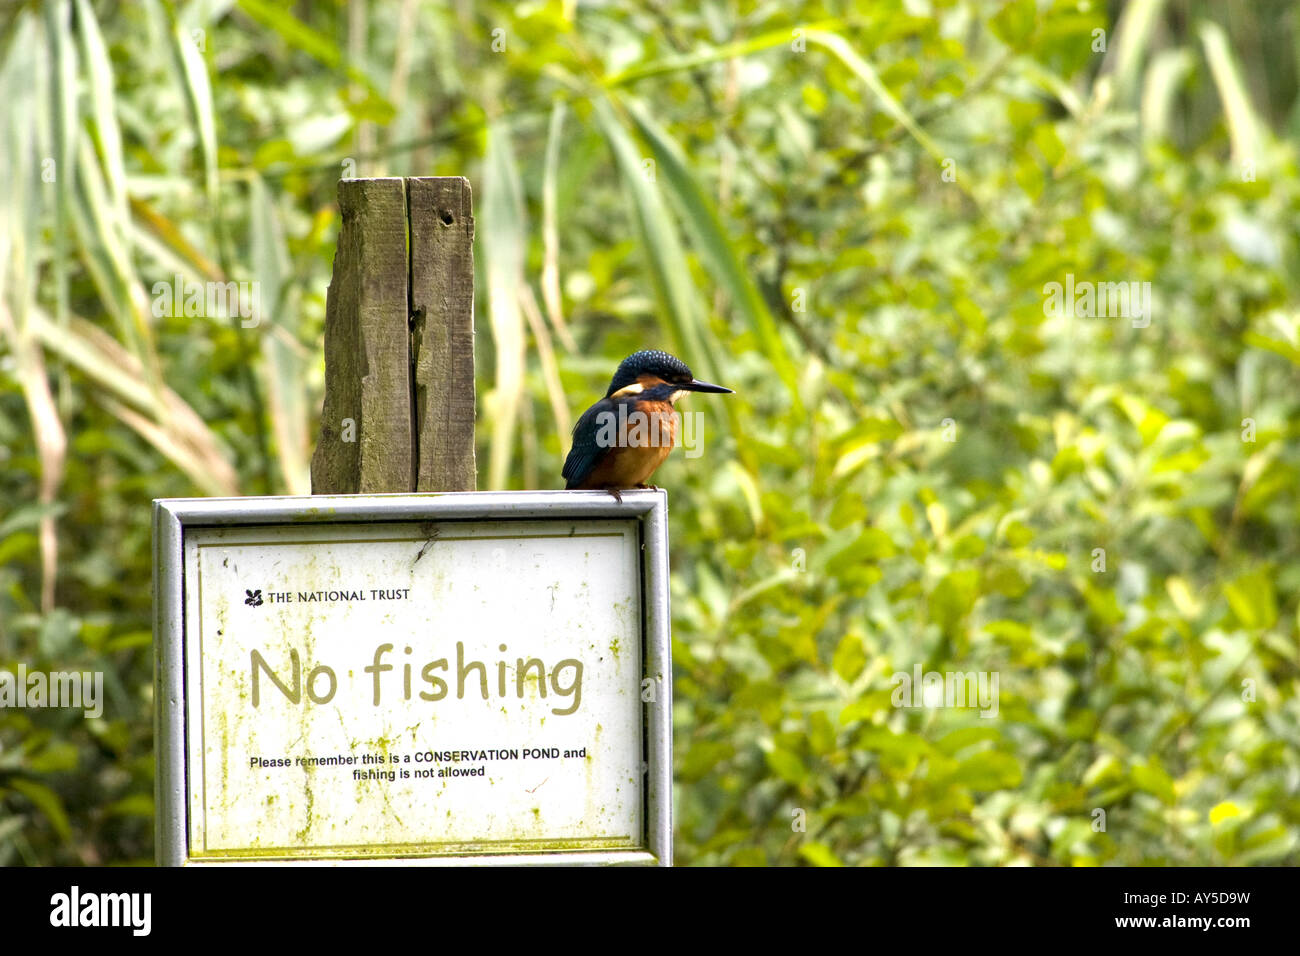 Young Kingfisher sitting on a National Trust no fishing sign Stock Photo